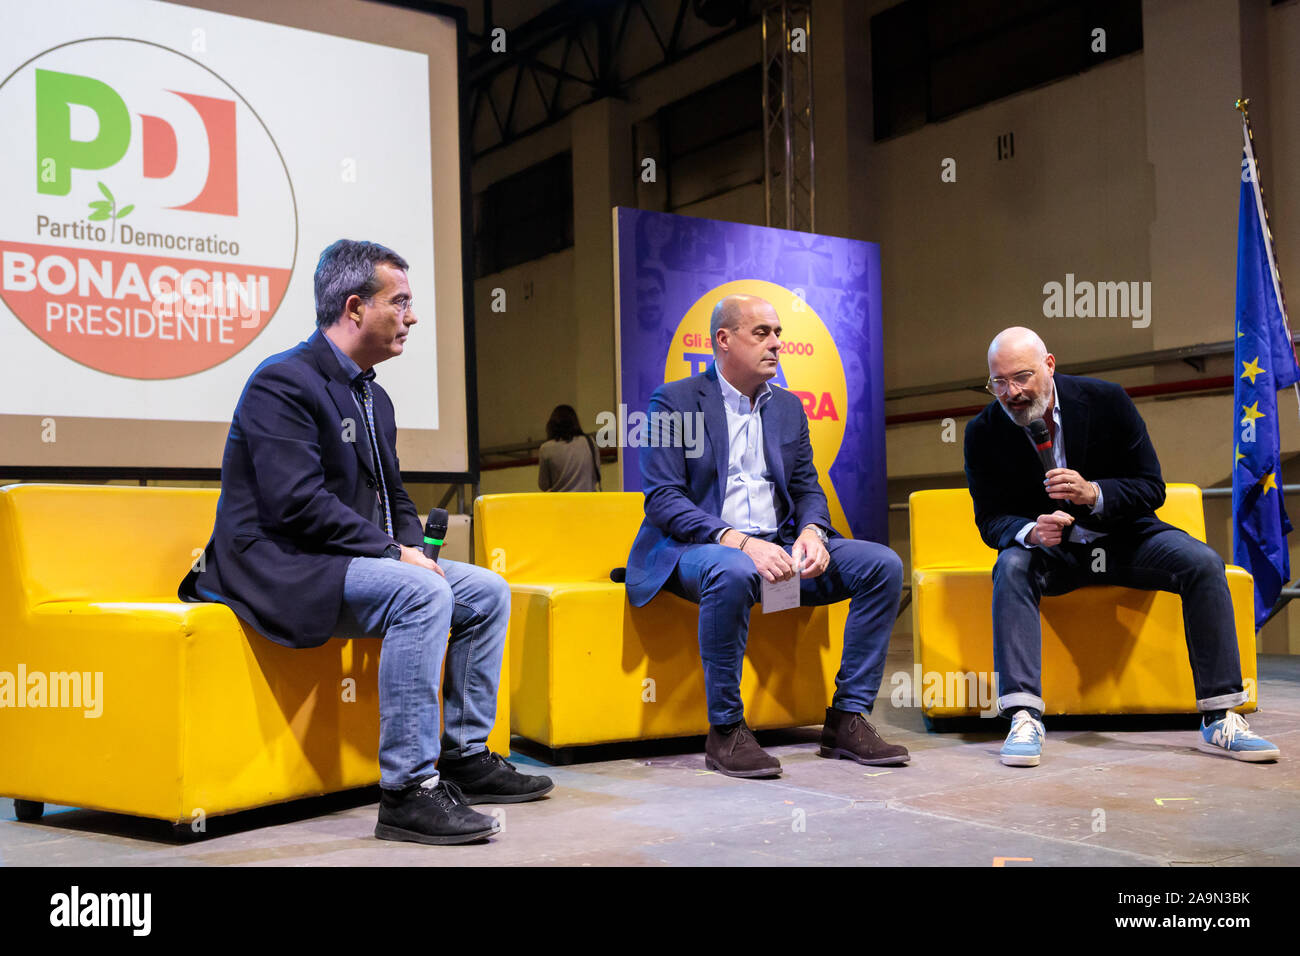 Bologna, ITALY. 16 November, 2019. Nicola Zingaretti (C), National Secretary of the Italian Democratic Party (PD), on stage with Stefano Bonaccini (R), Democratic candidate for the presidency of the Emilia-Romagna region and the journalist Giovanni Floris (L) on November 16, 2019 in Bologna, Italy. Credit: Massimiliano Donati/Alamy Live News Stock Photo